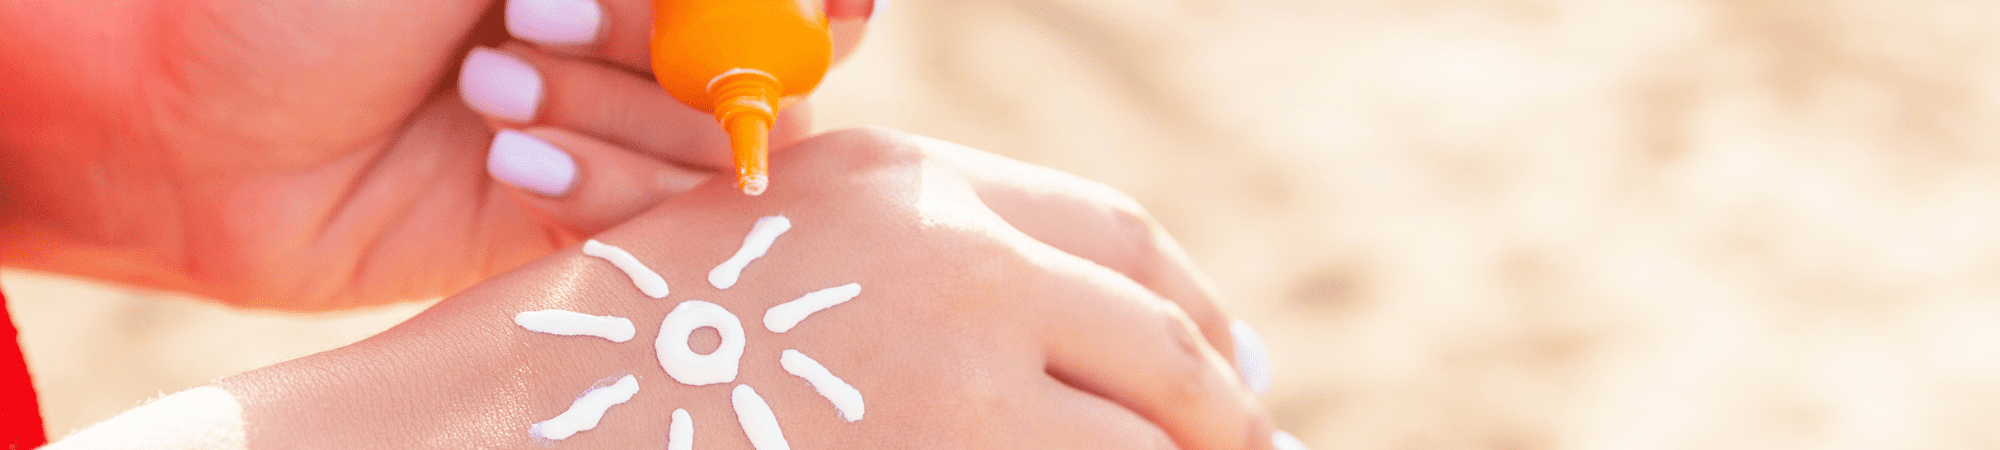 APAC suncare brands: Responding to changing needs of consumers